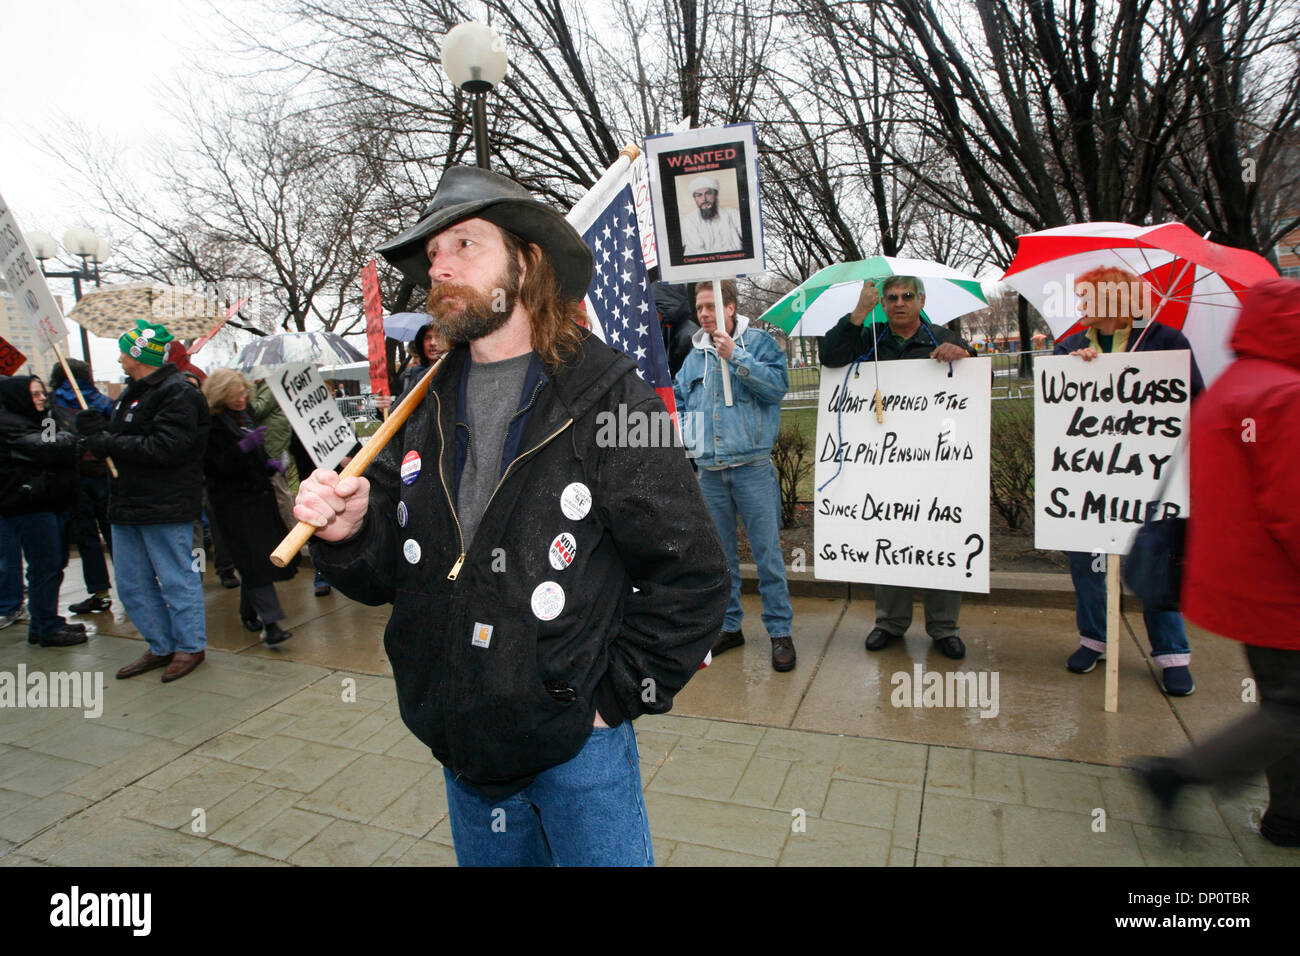 Apr 03, 2006; Detroit, MI, USA; Dennis Deeling, UAW member with 29 years seniority at Delphi East Manufacturing Plant in Flint, Michigan, stood  with others in Detroit. Deeling said he can't retire because he needs to help support a two-year-old grandchild who has cancer. Protesters, including members of Soldiers of Solidarity (SOS), a group of union members opposed to concessions, Stock Photo